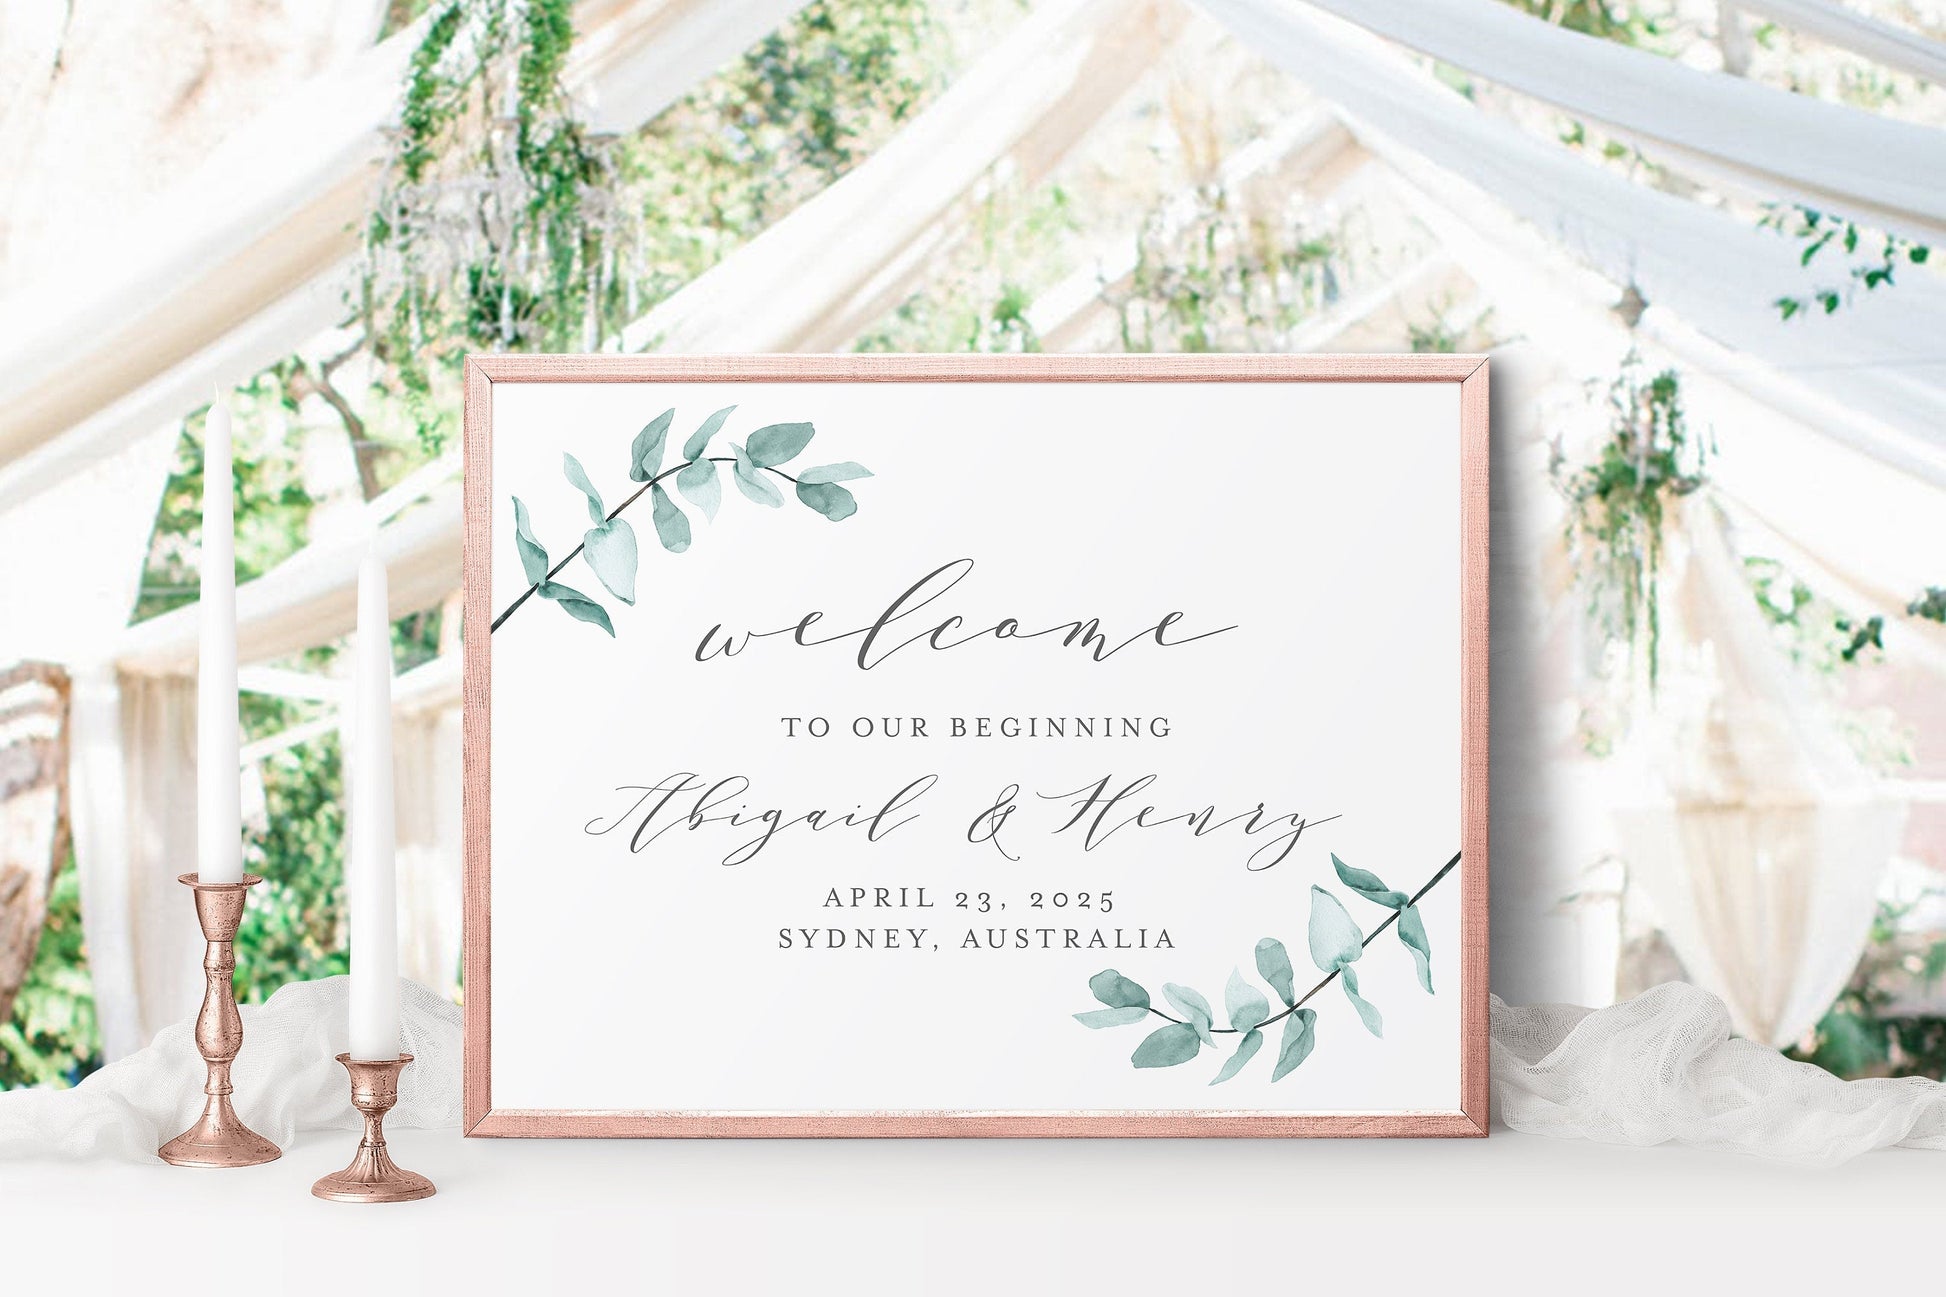 Printable Greenery Wedding Welcome Sign Editable Template Instant Download - Abi SIGNS | PHOTO BOOTH SAVVY PAPER CO